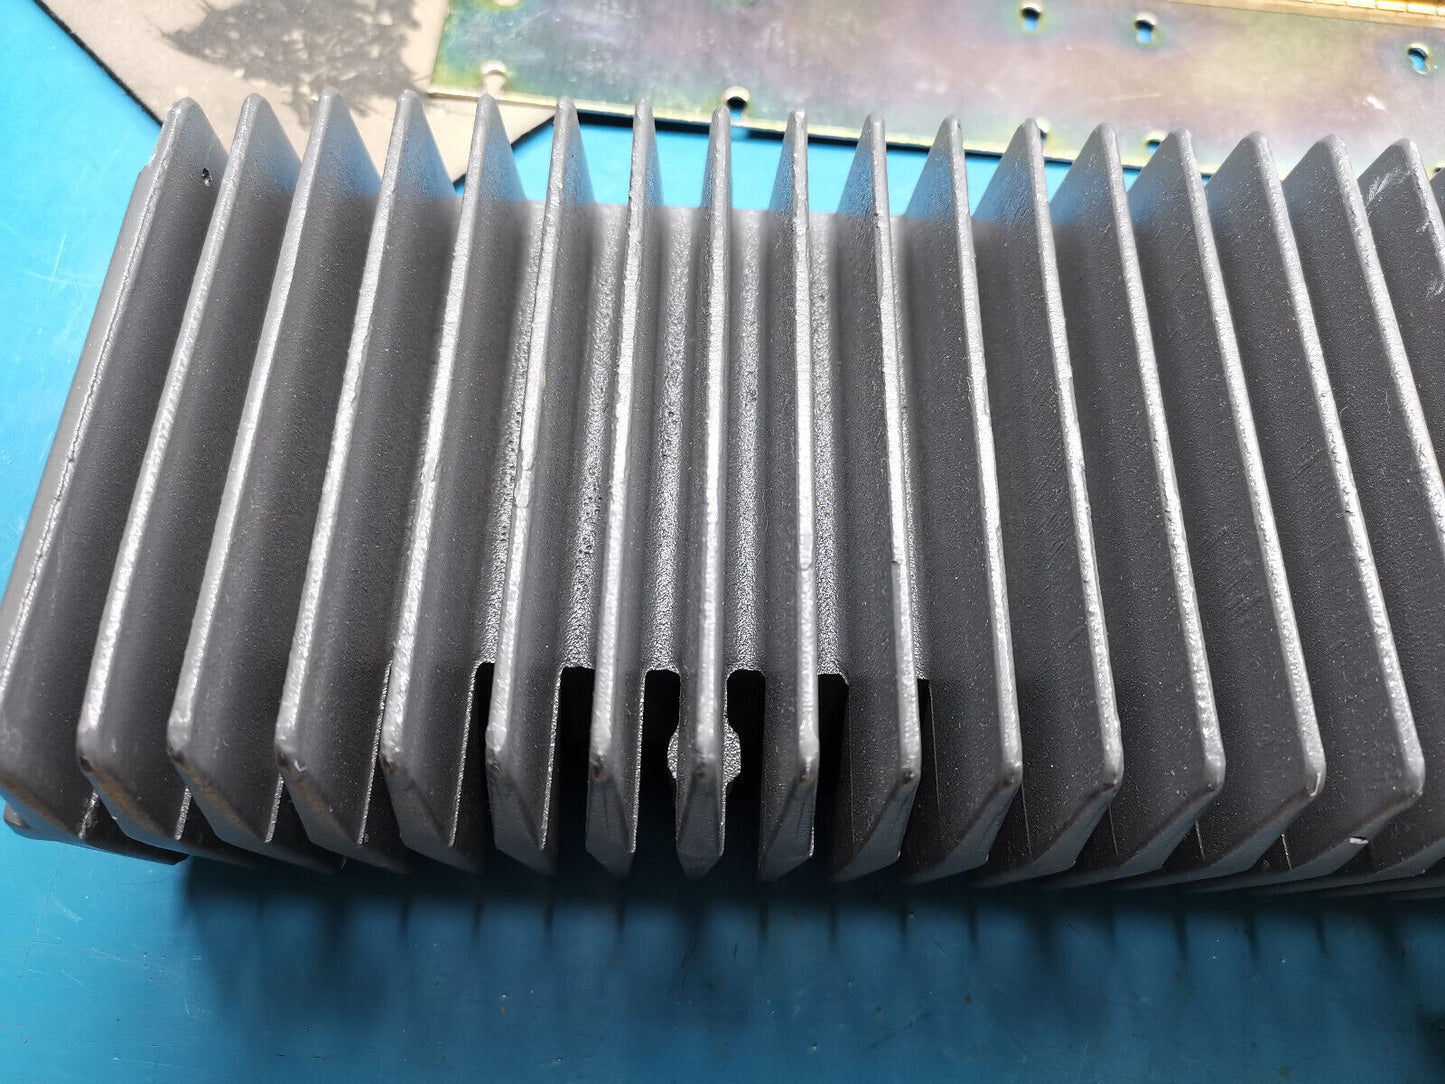 Large Heatsink For RF Amplifier With Shielded Compartments